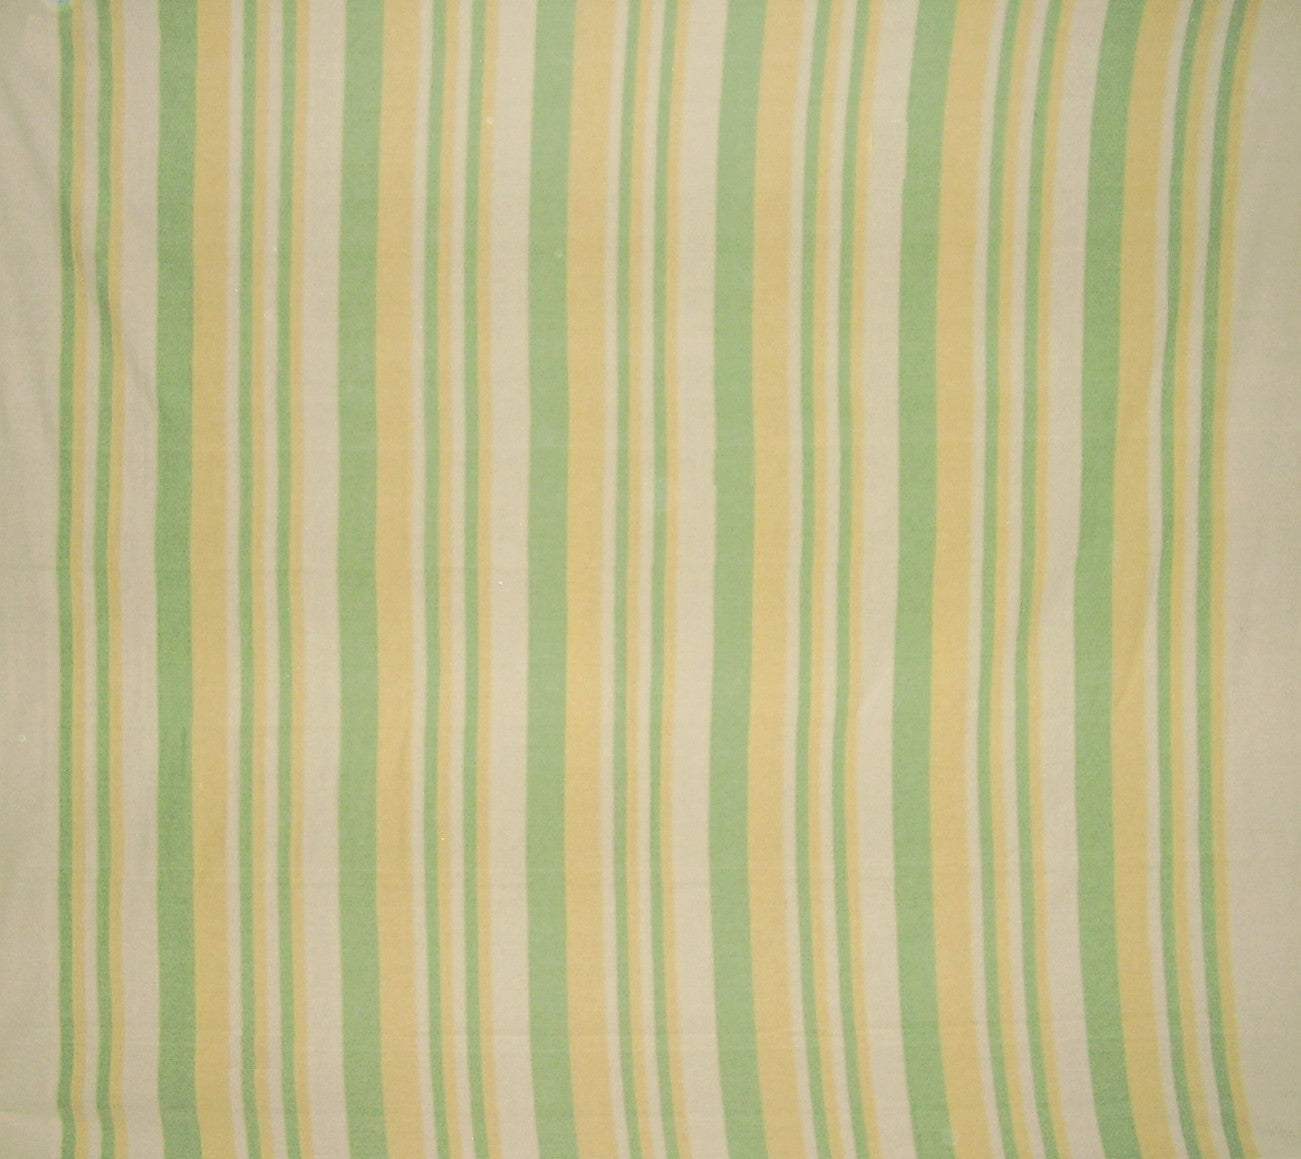 Heavy Cotton Ribbed Bedspread  98" x 88" Full Green & Yellow on Beige